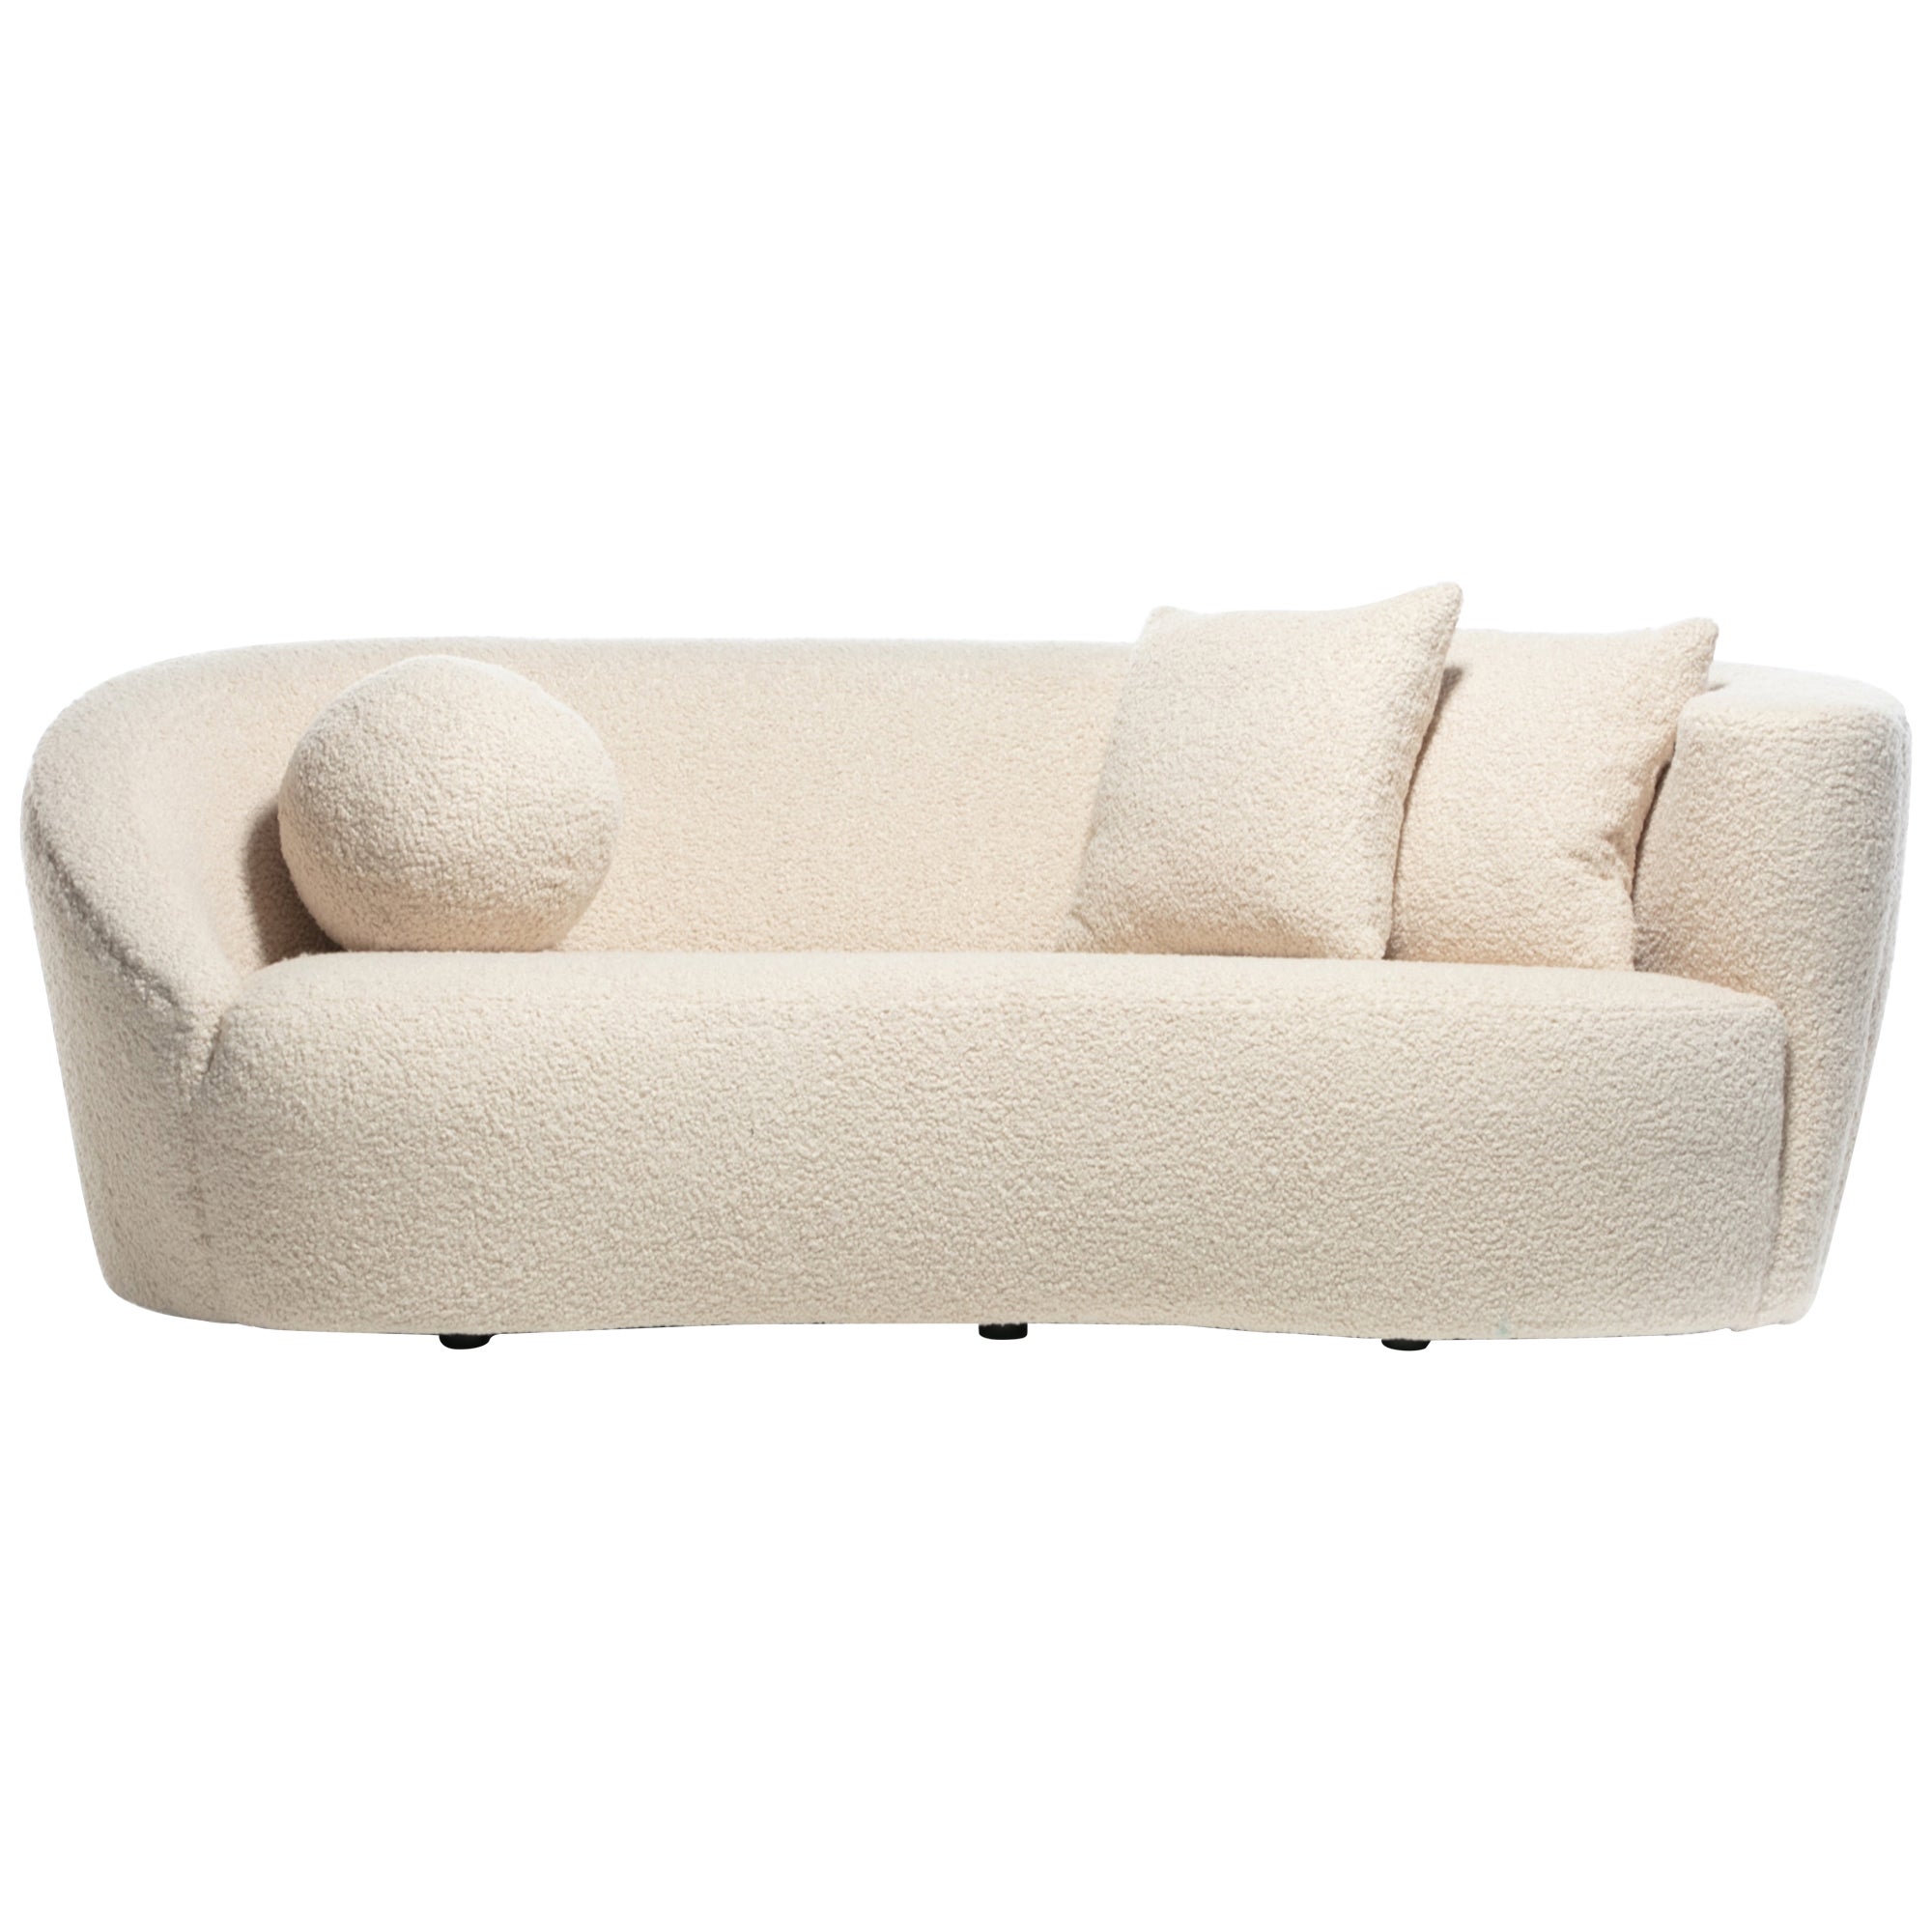 Vladimir Kagan Nautilus Sofa in Ivory White Bouclé by Directional, c. 1990 For Sale